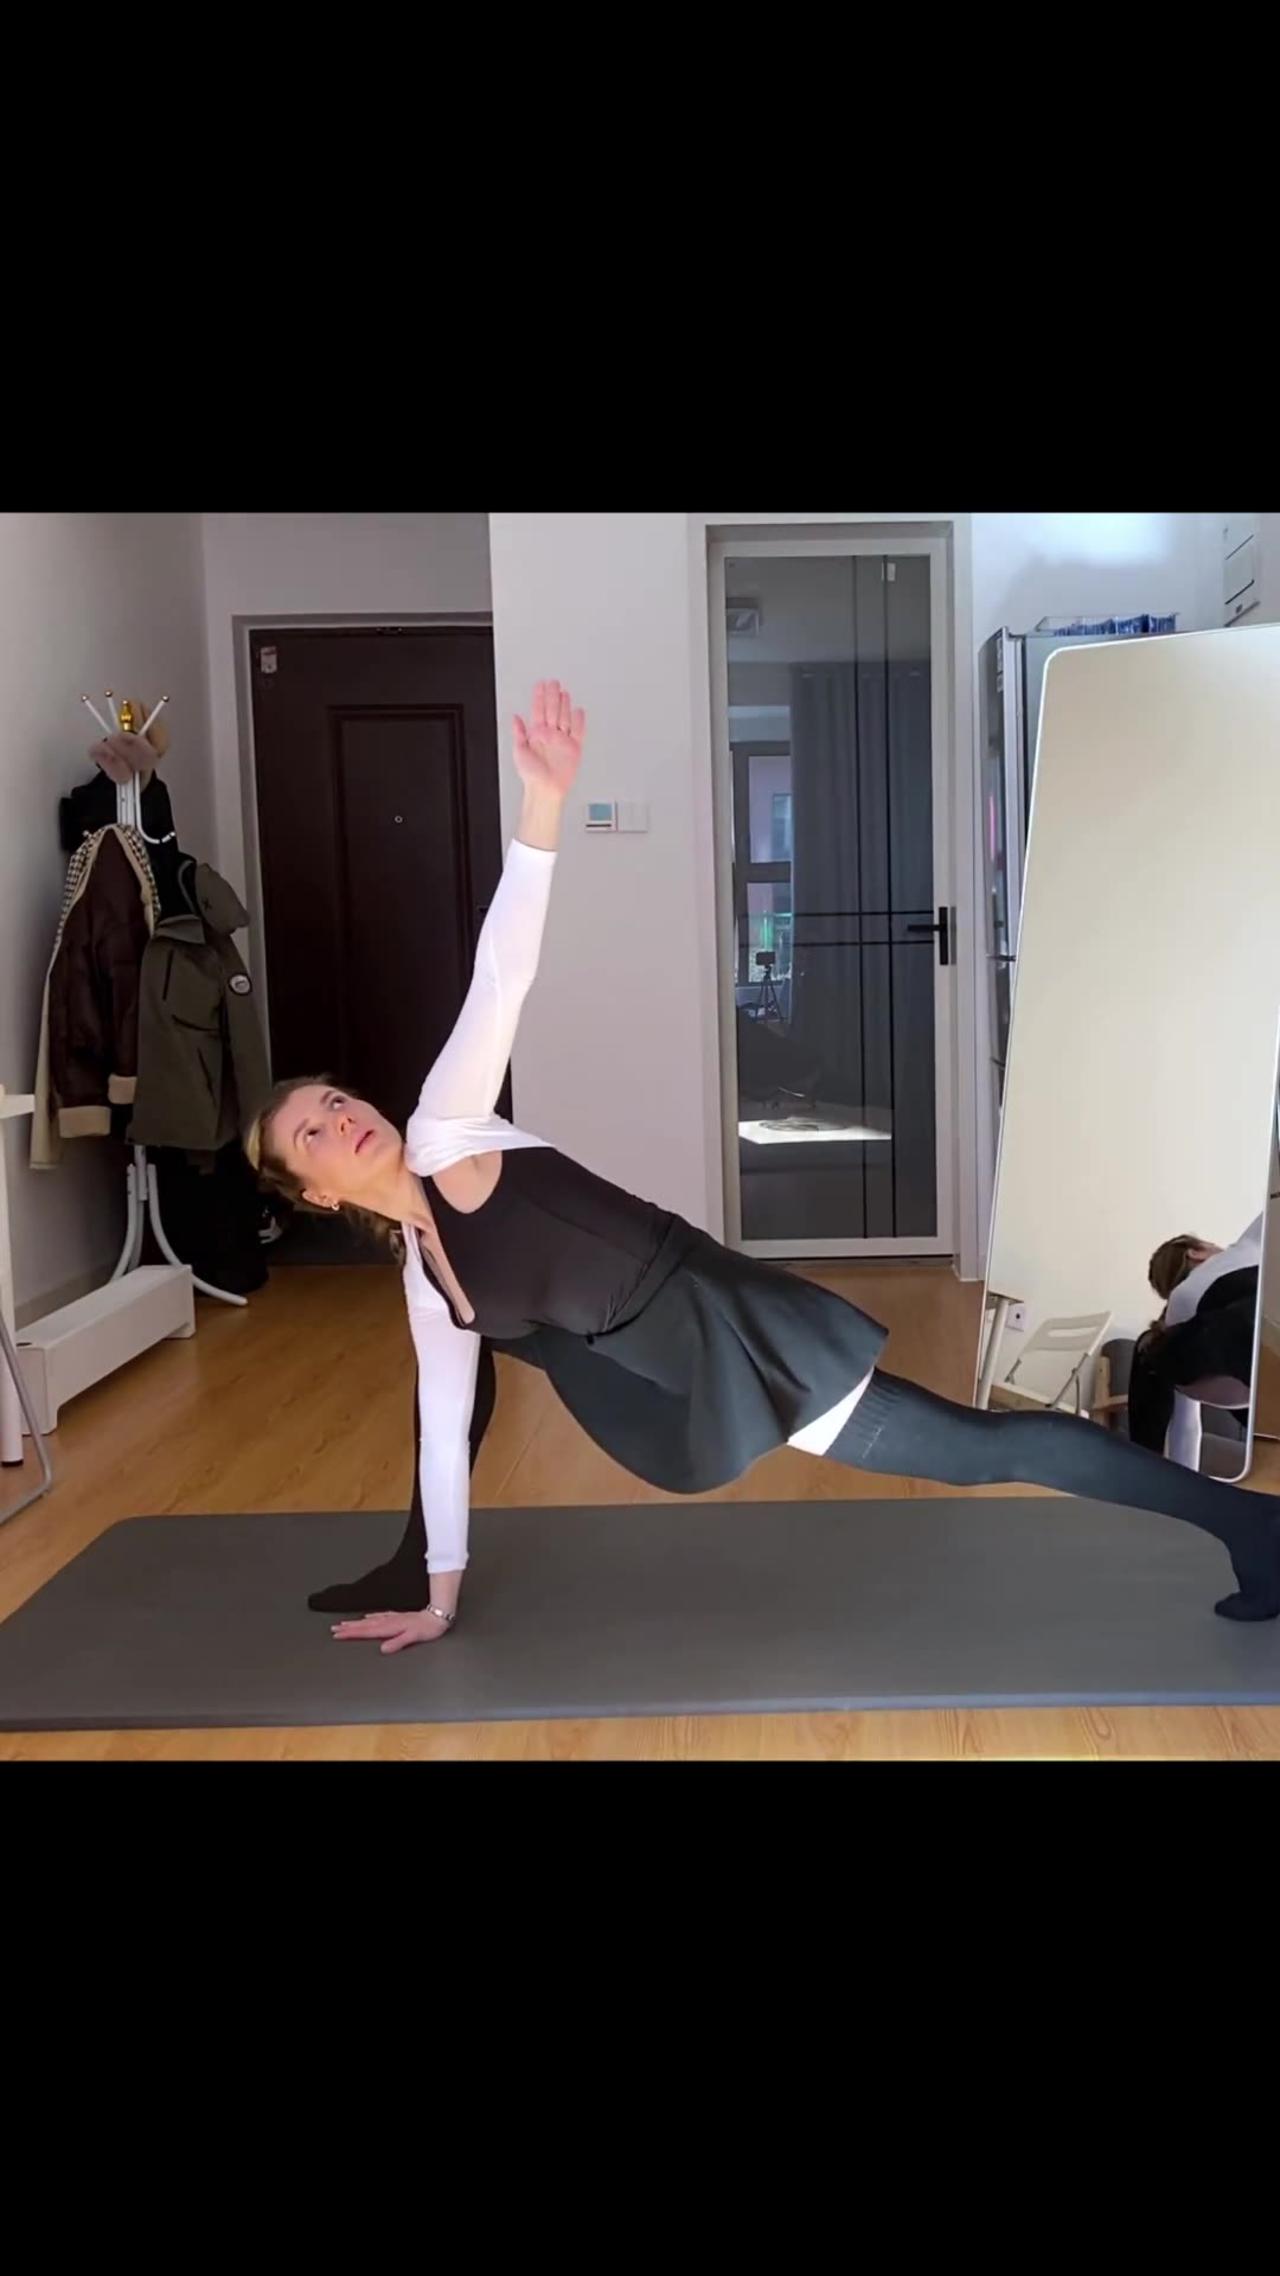 Yoga at home in a skirt